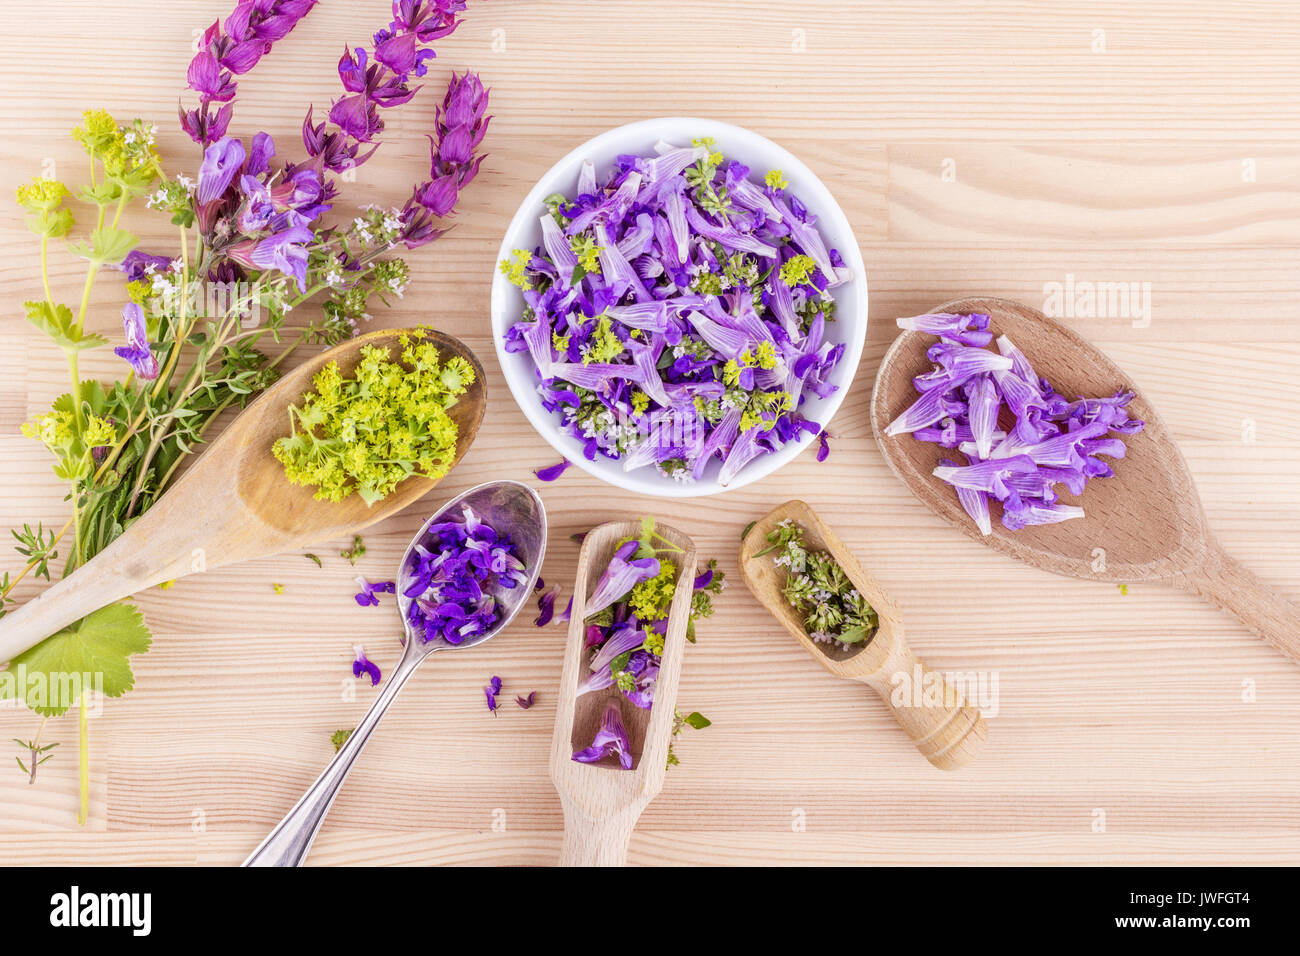 flowers of lavender, thyme and lady's mantle Stock Photo